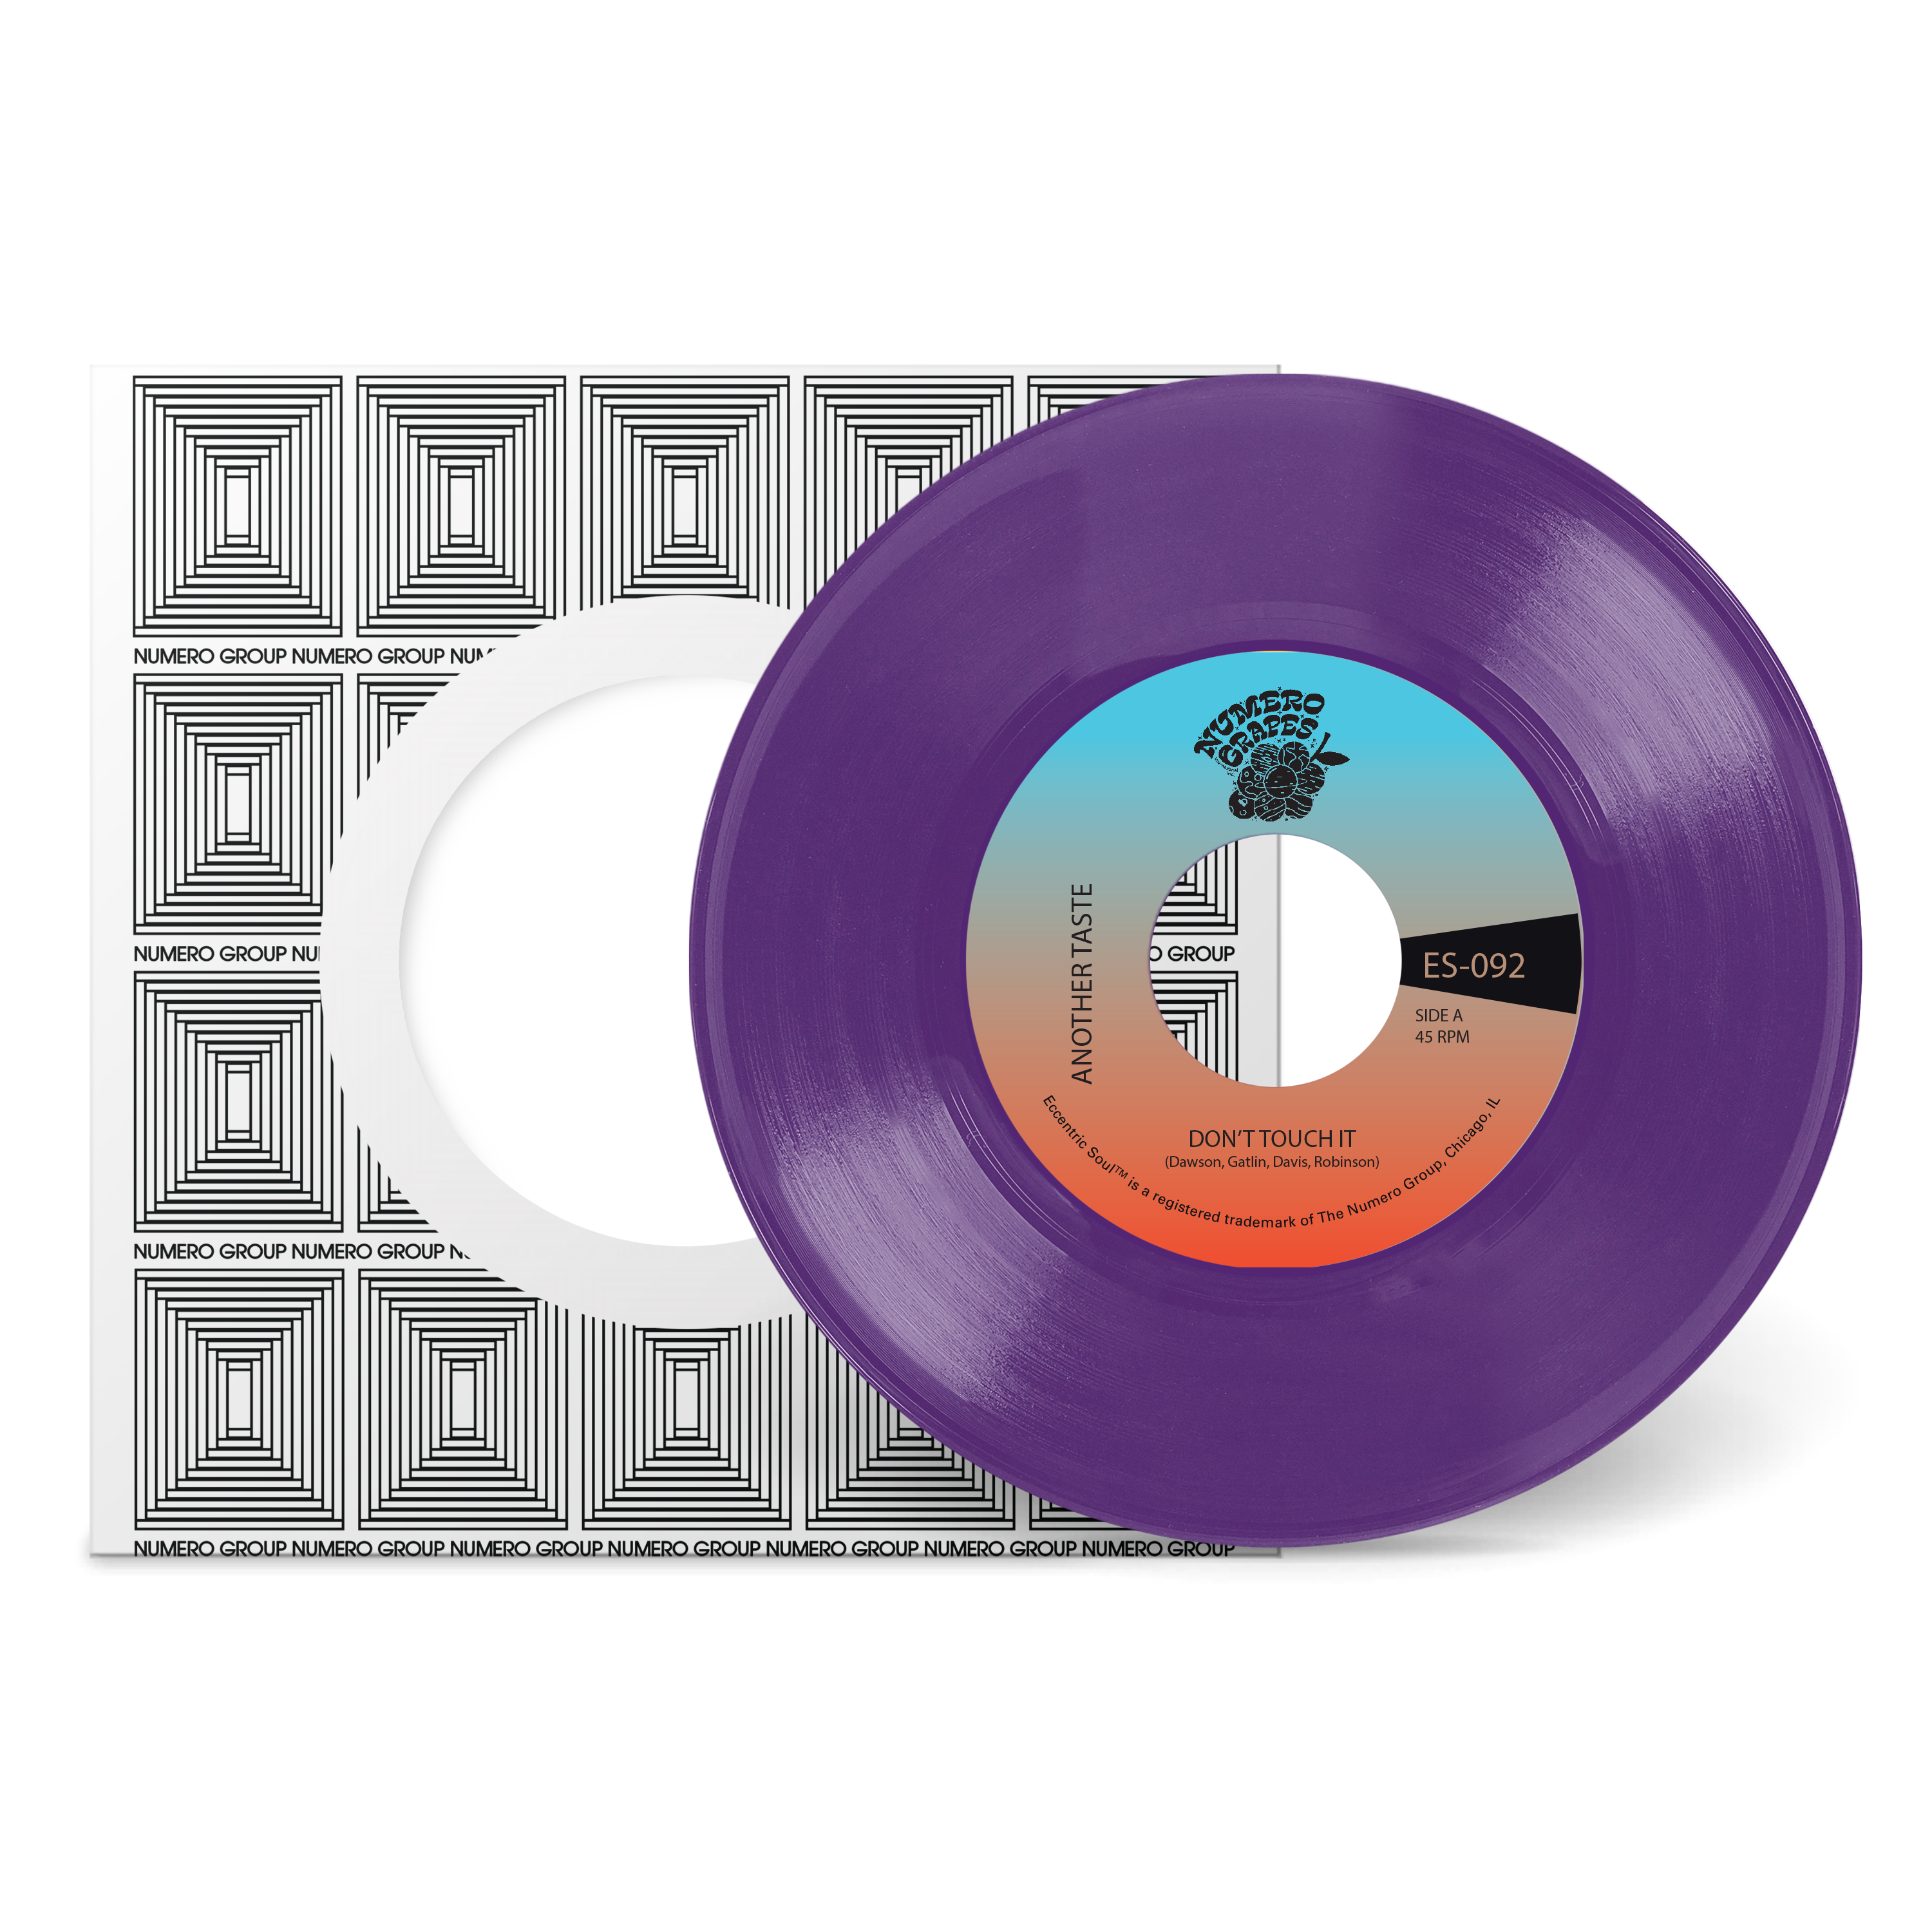 Another Taste, Maxx Traxx - Don't Touch It: Limited Opaque Purple Vinyl 7" Single